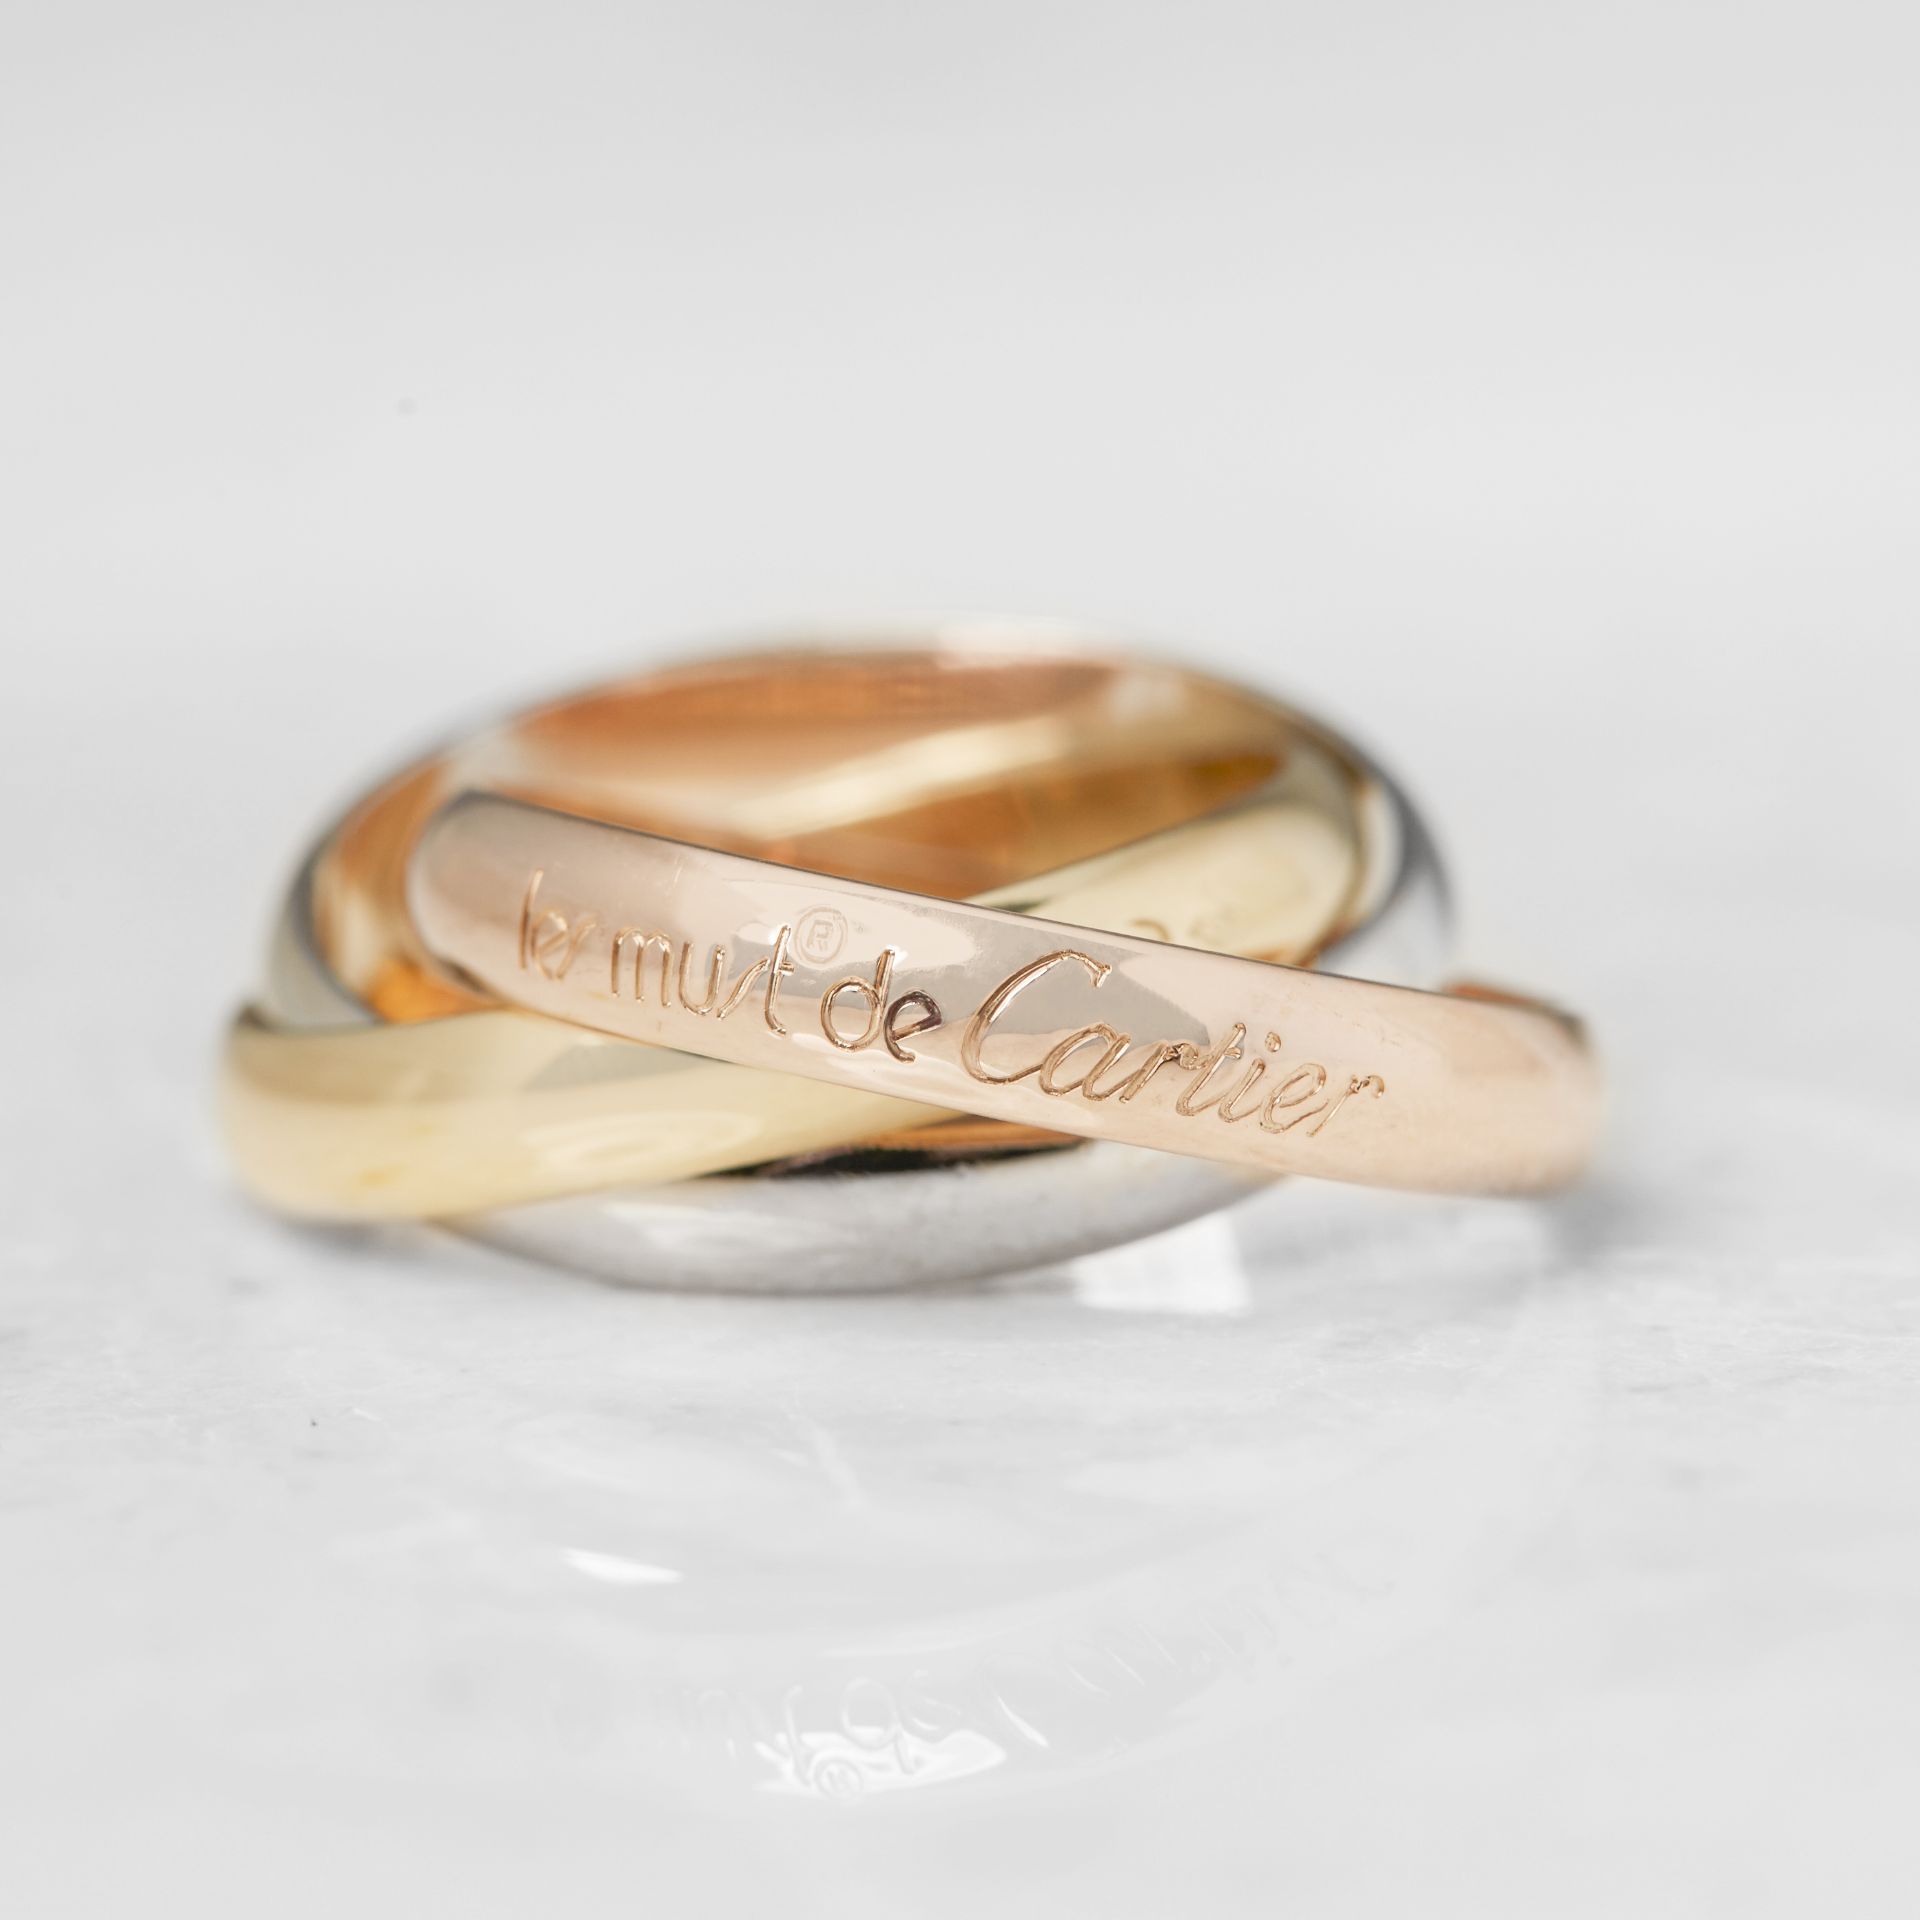 Cartier 18k Yellow, White & Rose Gold Trinity Ring - Image 13 of 18